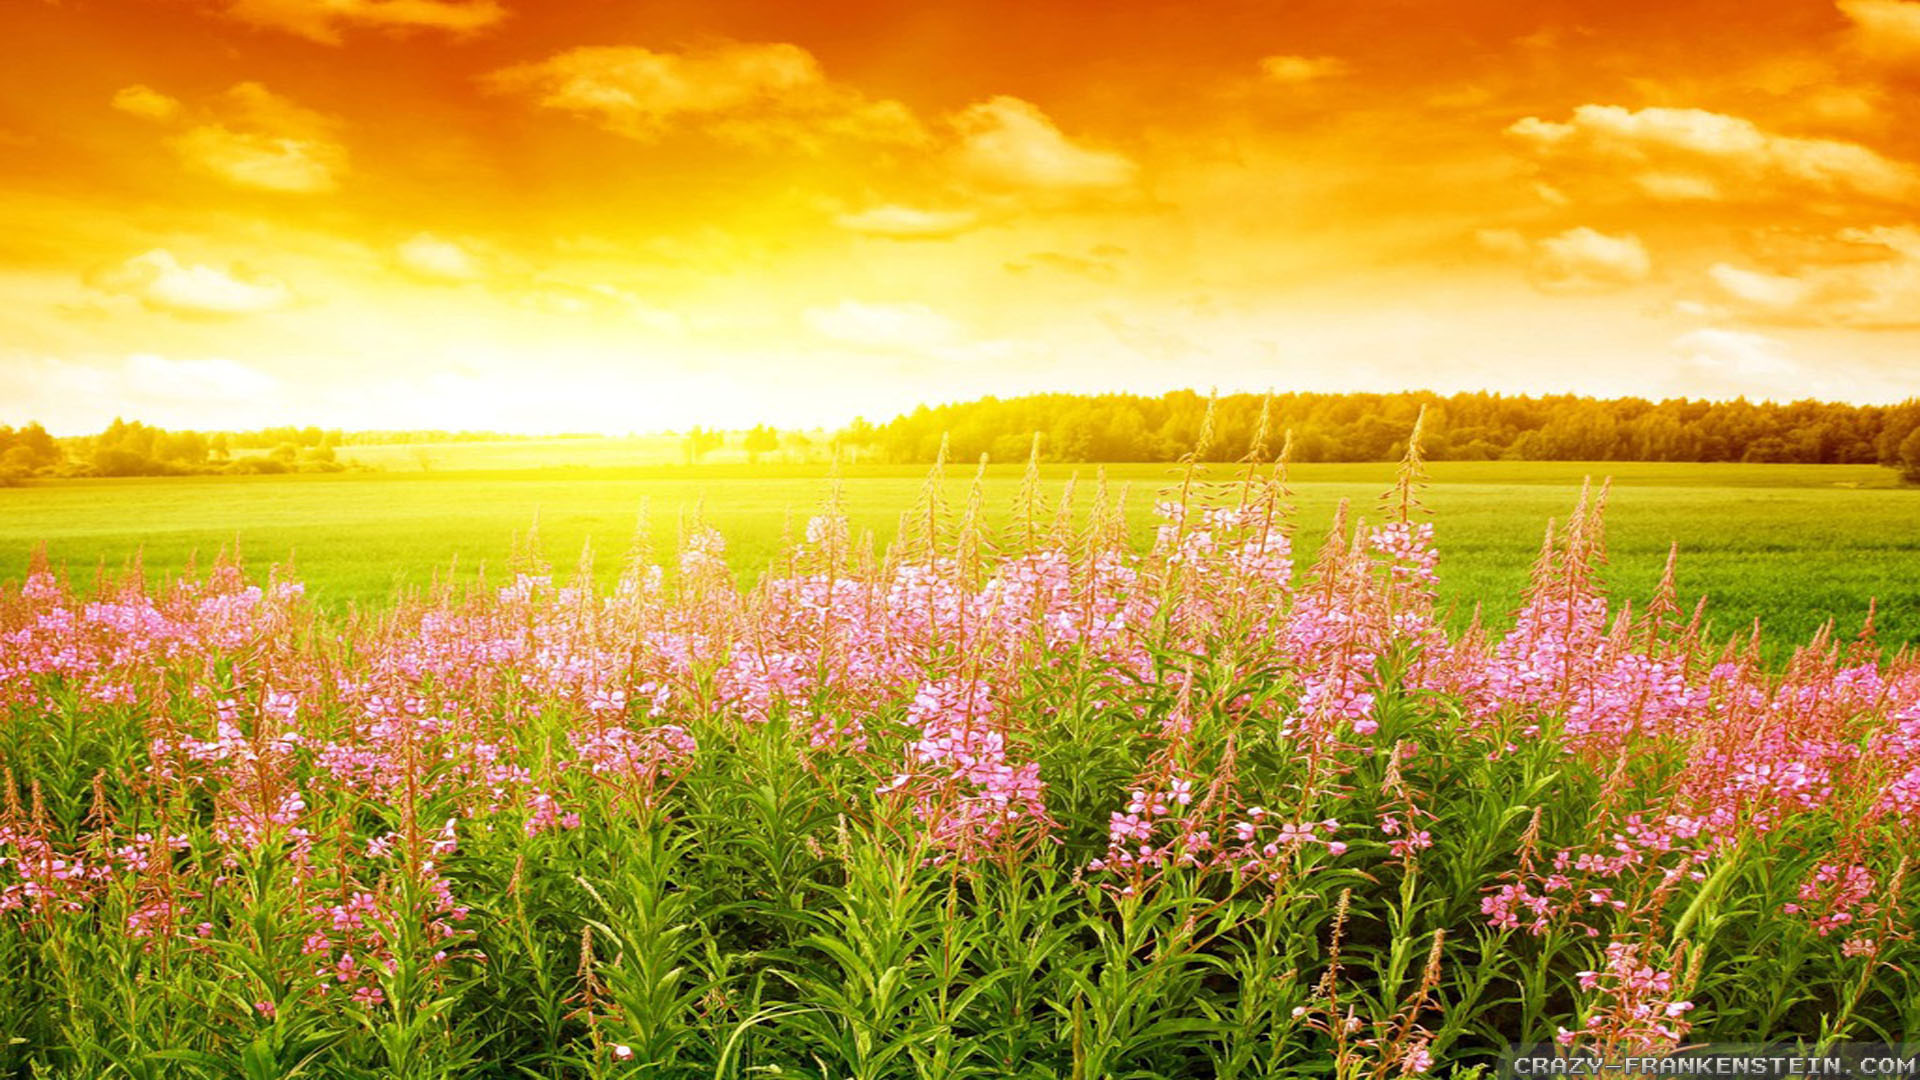 Beautiful Summer Wallpapers & HD Image free download